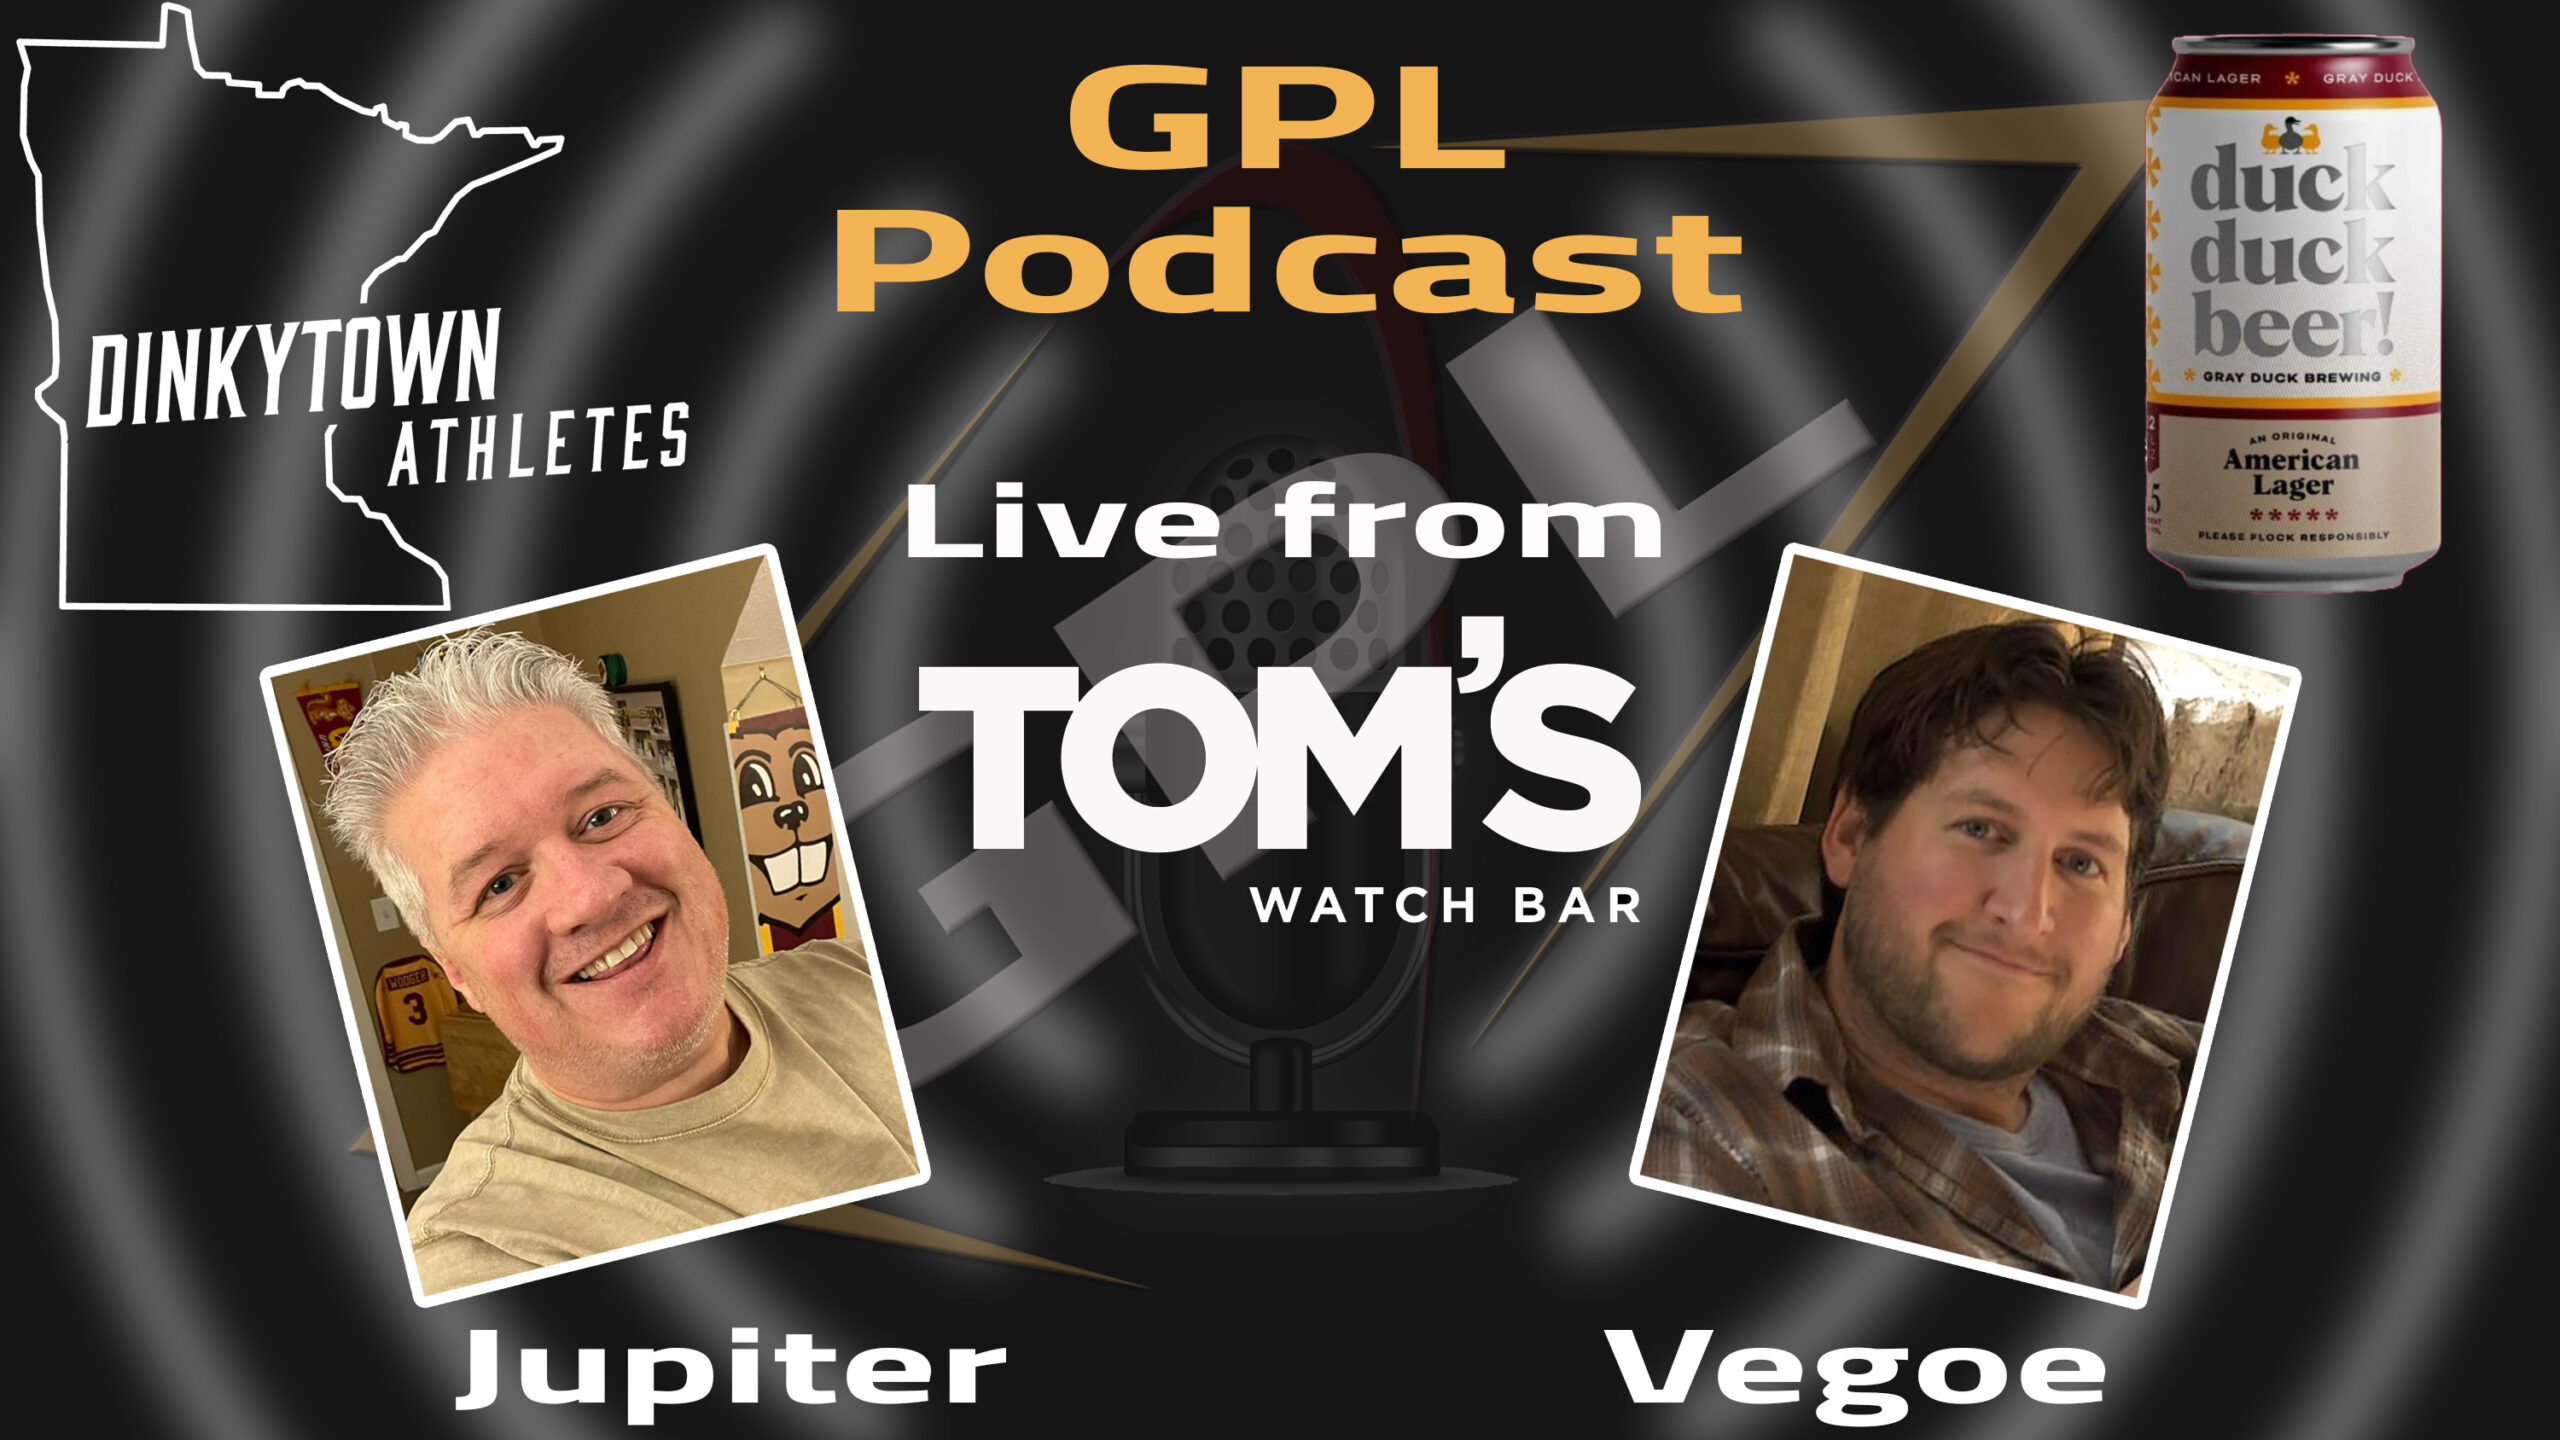 GPL Podcast from Tom’s Watch Bar